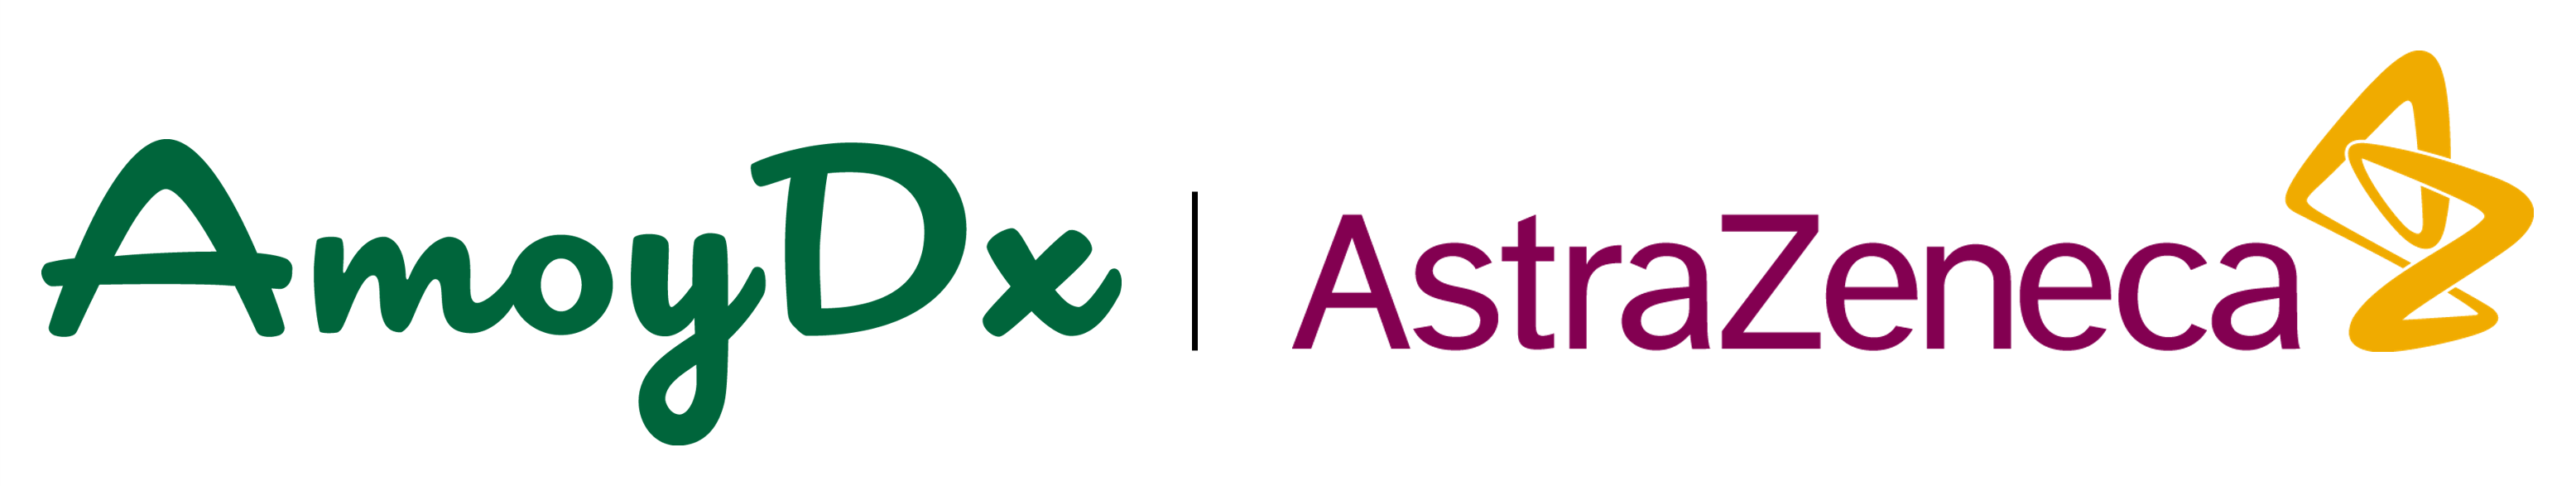 AmoyDx Signed a Collaboration Agreement with AstraZeneca for HRD Companion Diagnostic